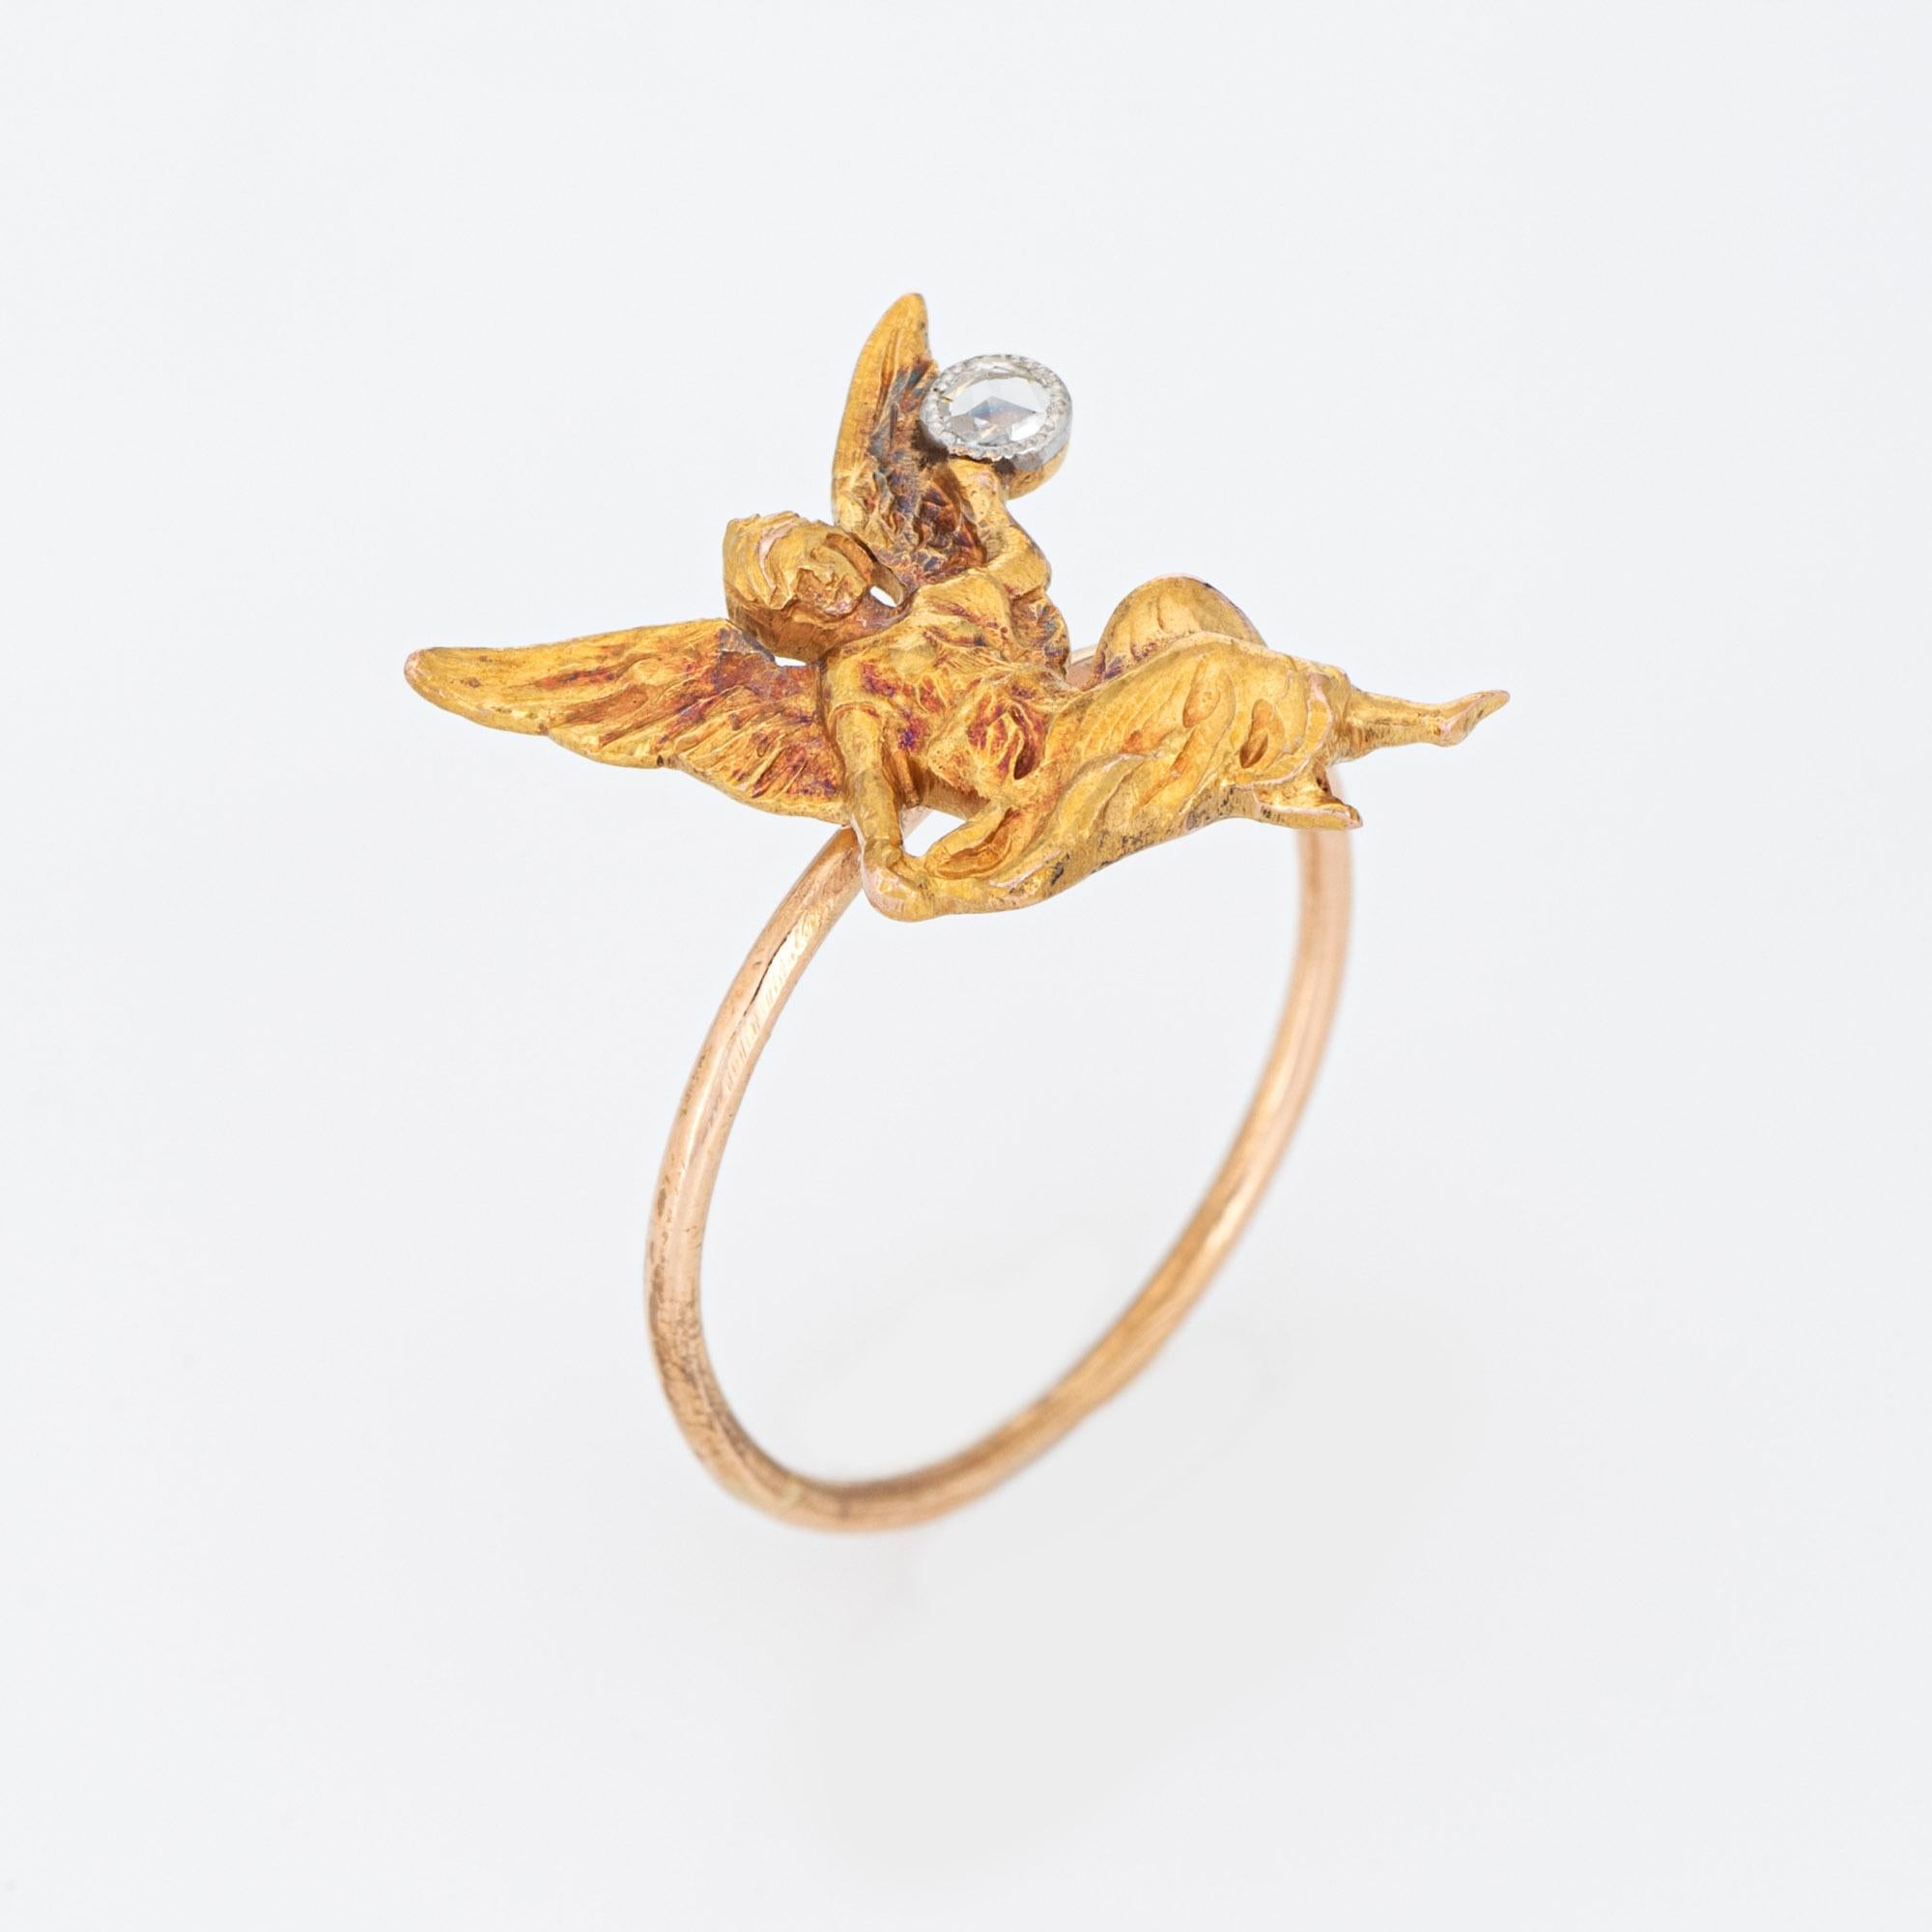 Originally an antique Art Nouveau era stick pin (circa 1900s to 1910s), the winged angel is crafted in 18 karat yellow gold.

The ring is mounted with the original stick pin. Our jeweler rounded the stick pin into a slim band for the finger. The